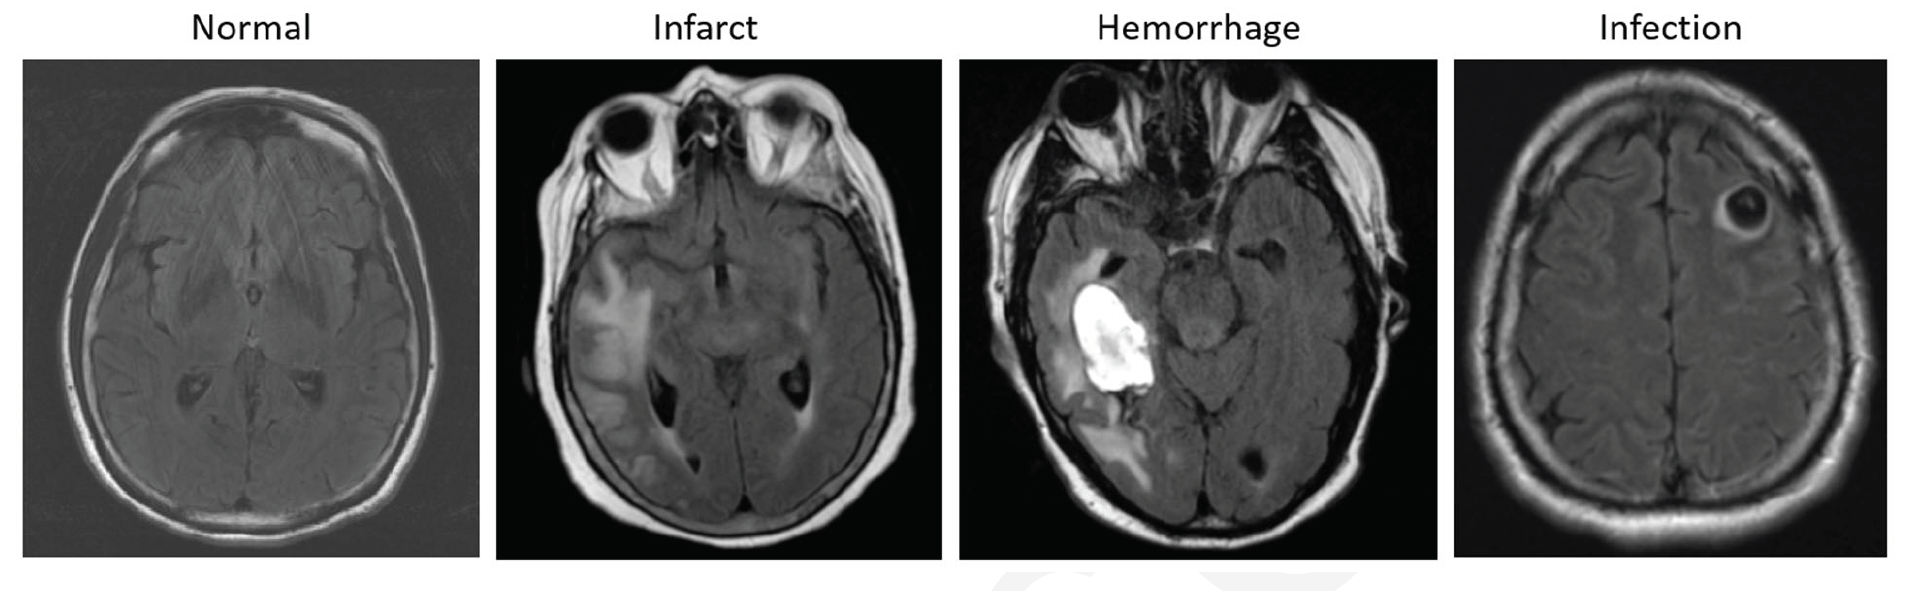 Examples of axial FLAIR sequences from studies within dataset A. From left

to right: a patient with a ‘likely normal’ brain; a patient presenting an intraparenchymal

hemorrhage within the right temporal lobe; a patient presenting an acute infarct of the

inferior division of the right middle cerebral artery; and a patient with known

neurocysticercosis presenting a rounded cystic lesion in the left middle frontal gyrus.

Credit: RSNA